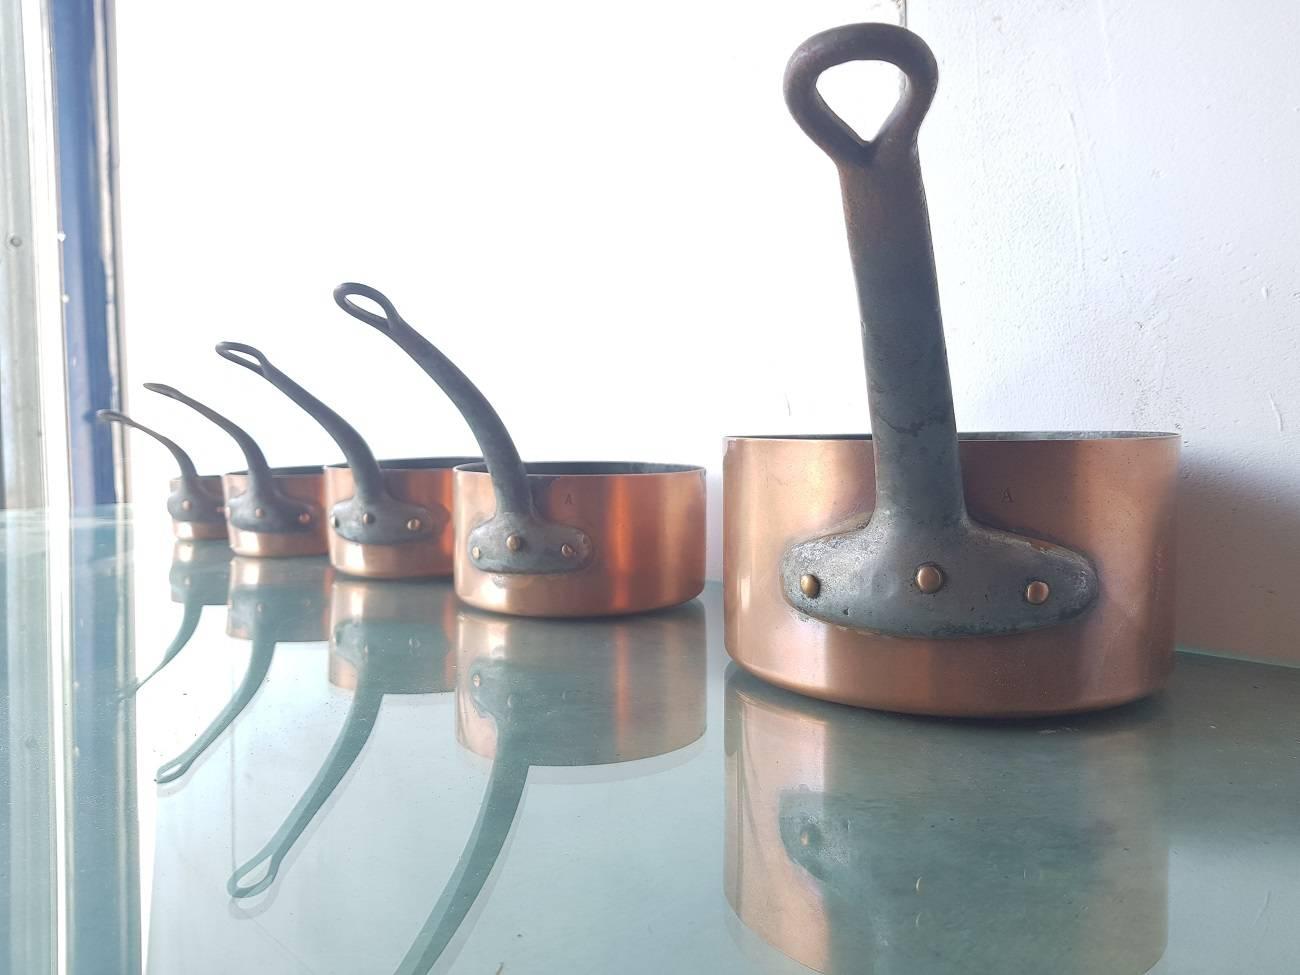 Old French copper cookware consisting of five parts all with tinned inside and metallic handles. These were made in the first half of the 20th century and in a used condition.

The measurements are 11 cm/ 4.3 inch, 13.5 cm/ 5.3 inch, 14.5 cm/ 5.7